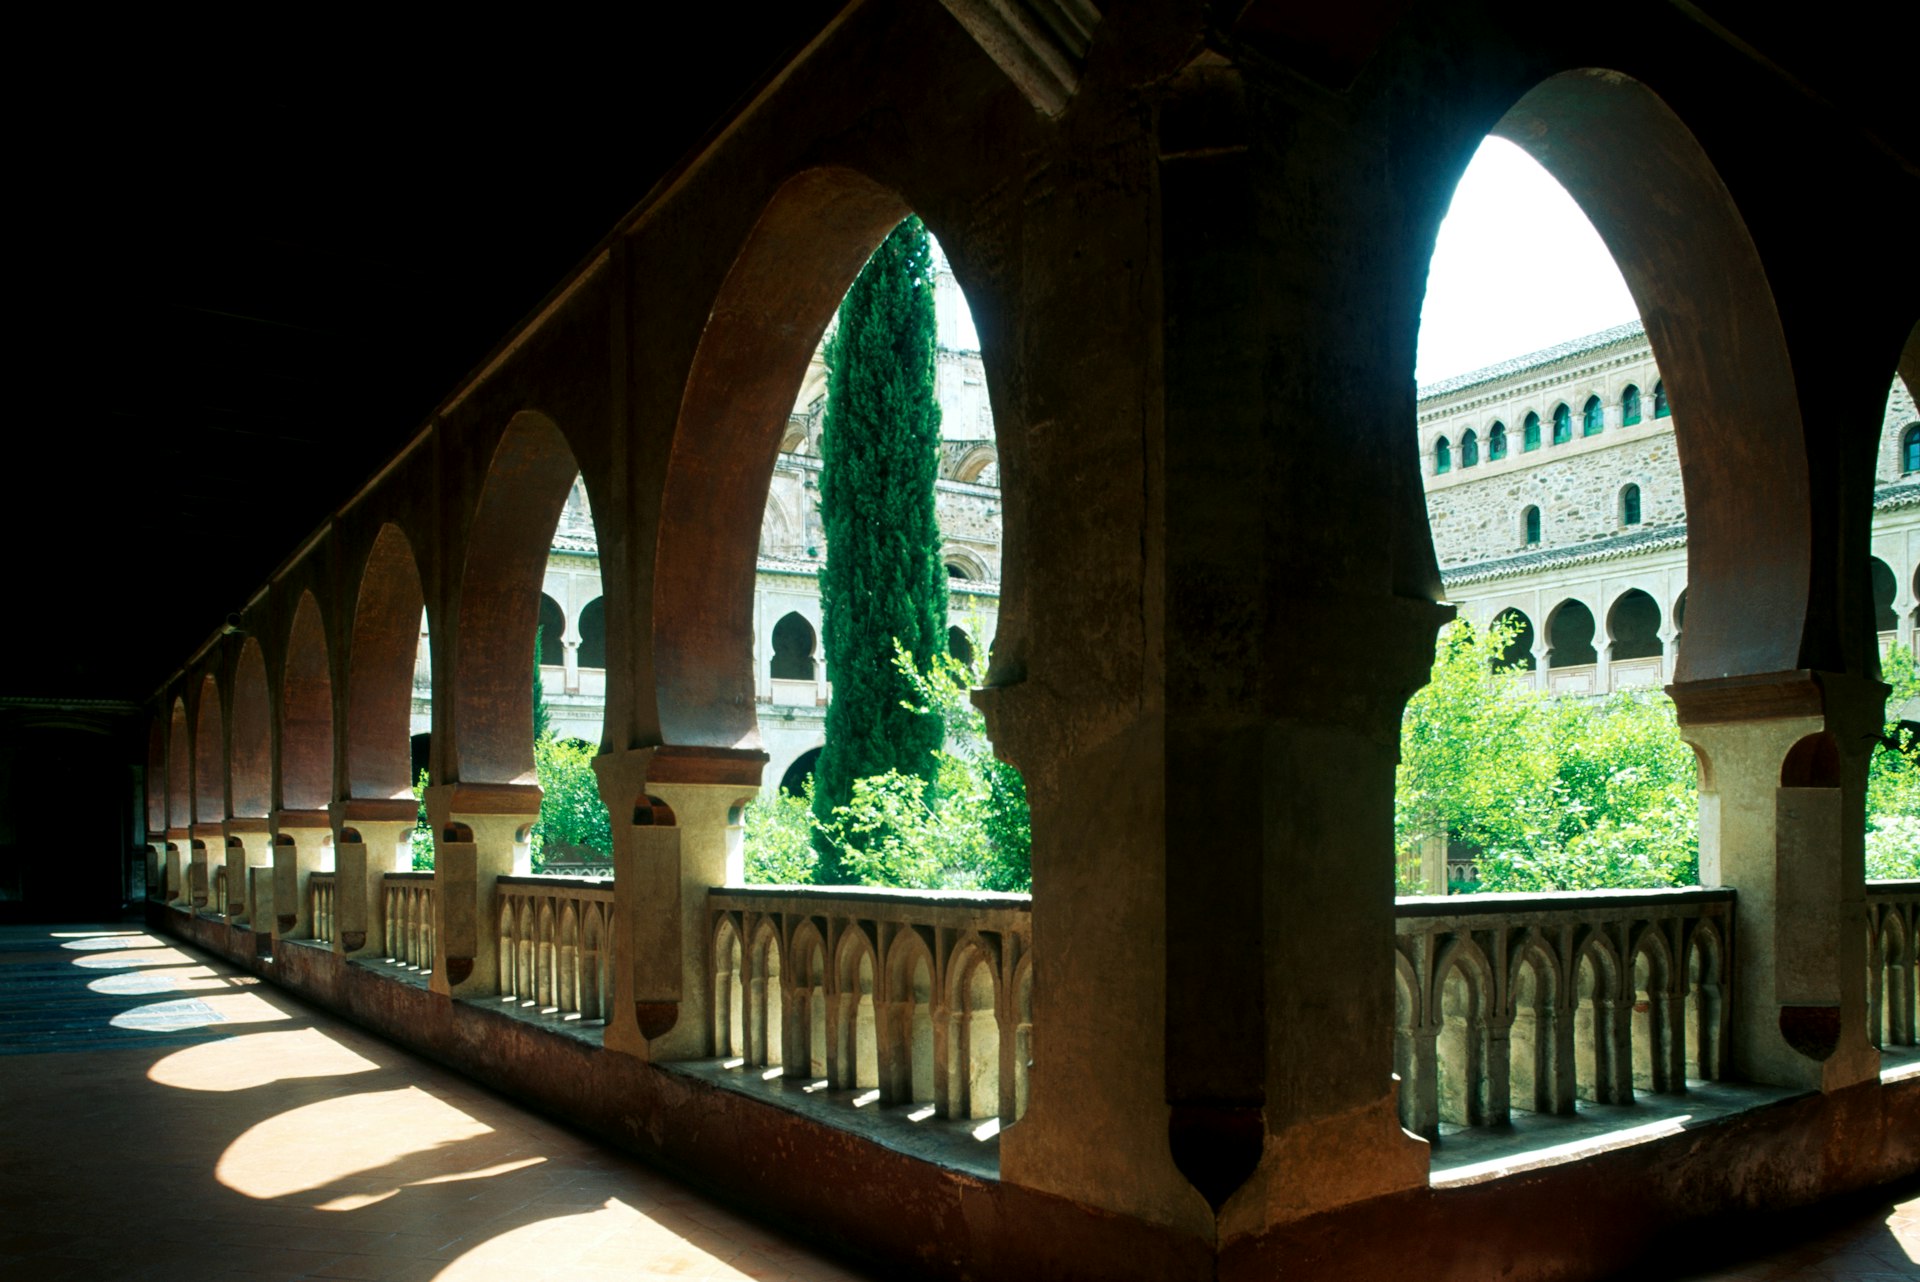 The cloisters at Guadalupe are just one of the building's highlights. © De Agostini / W. Buss / Getty Images